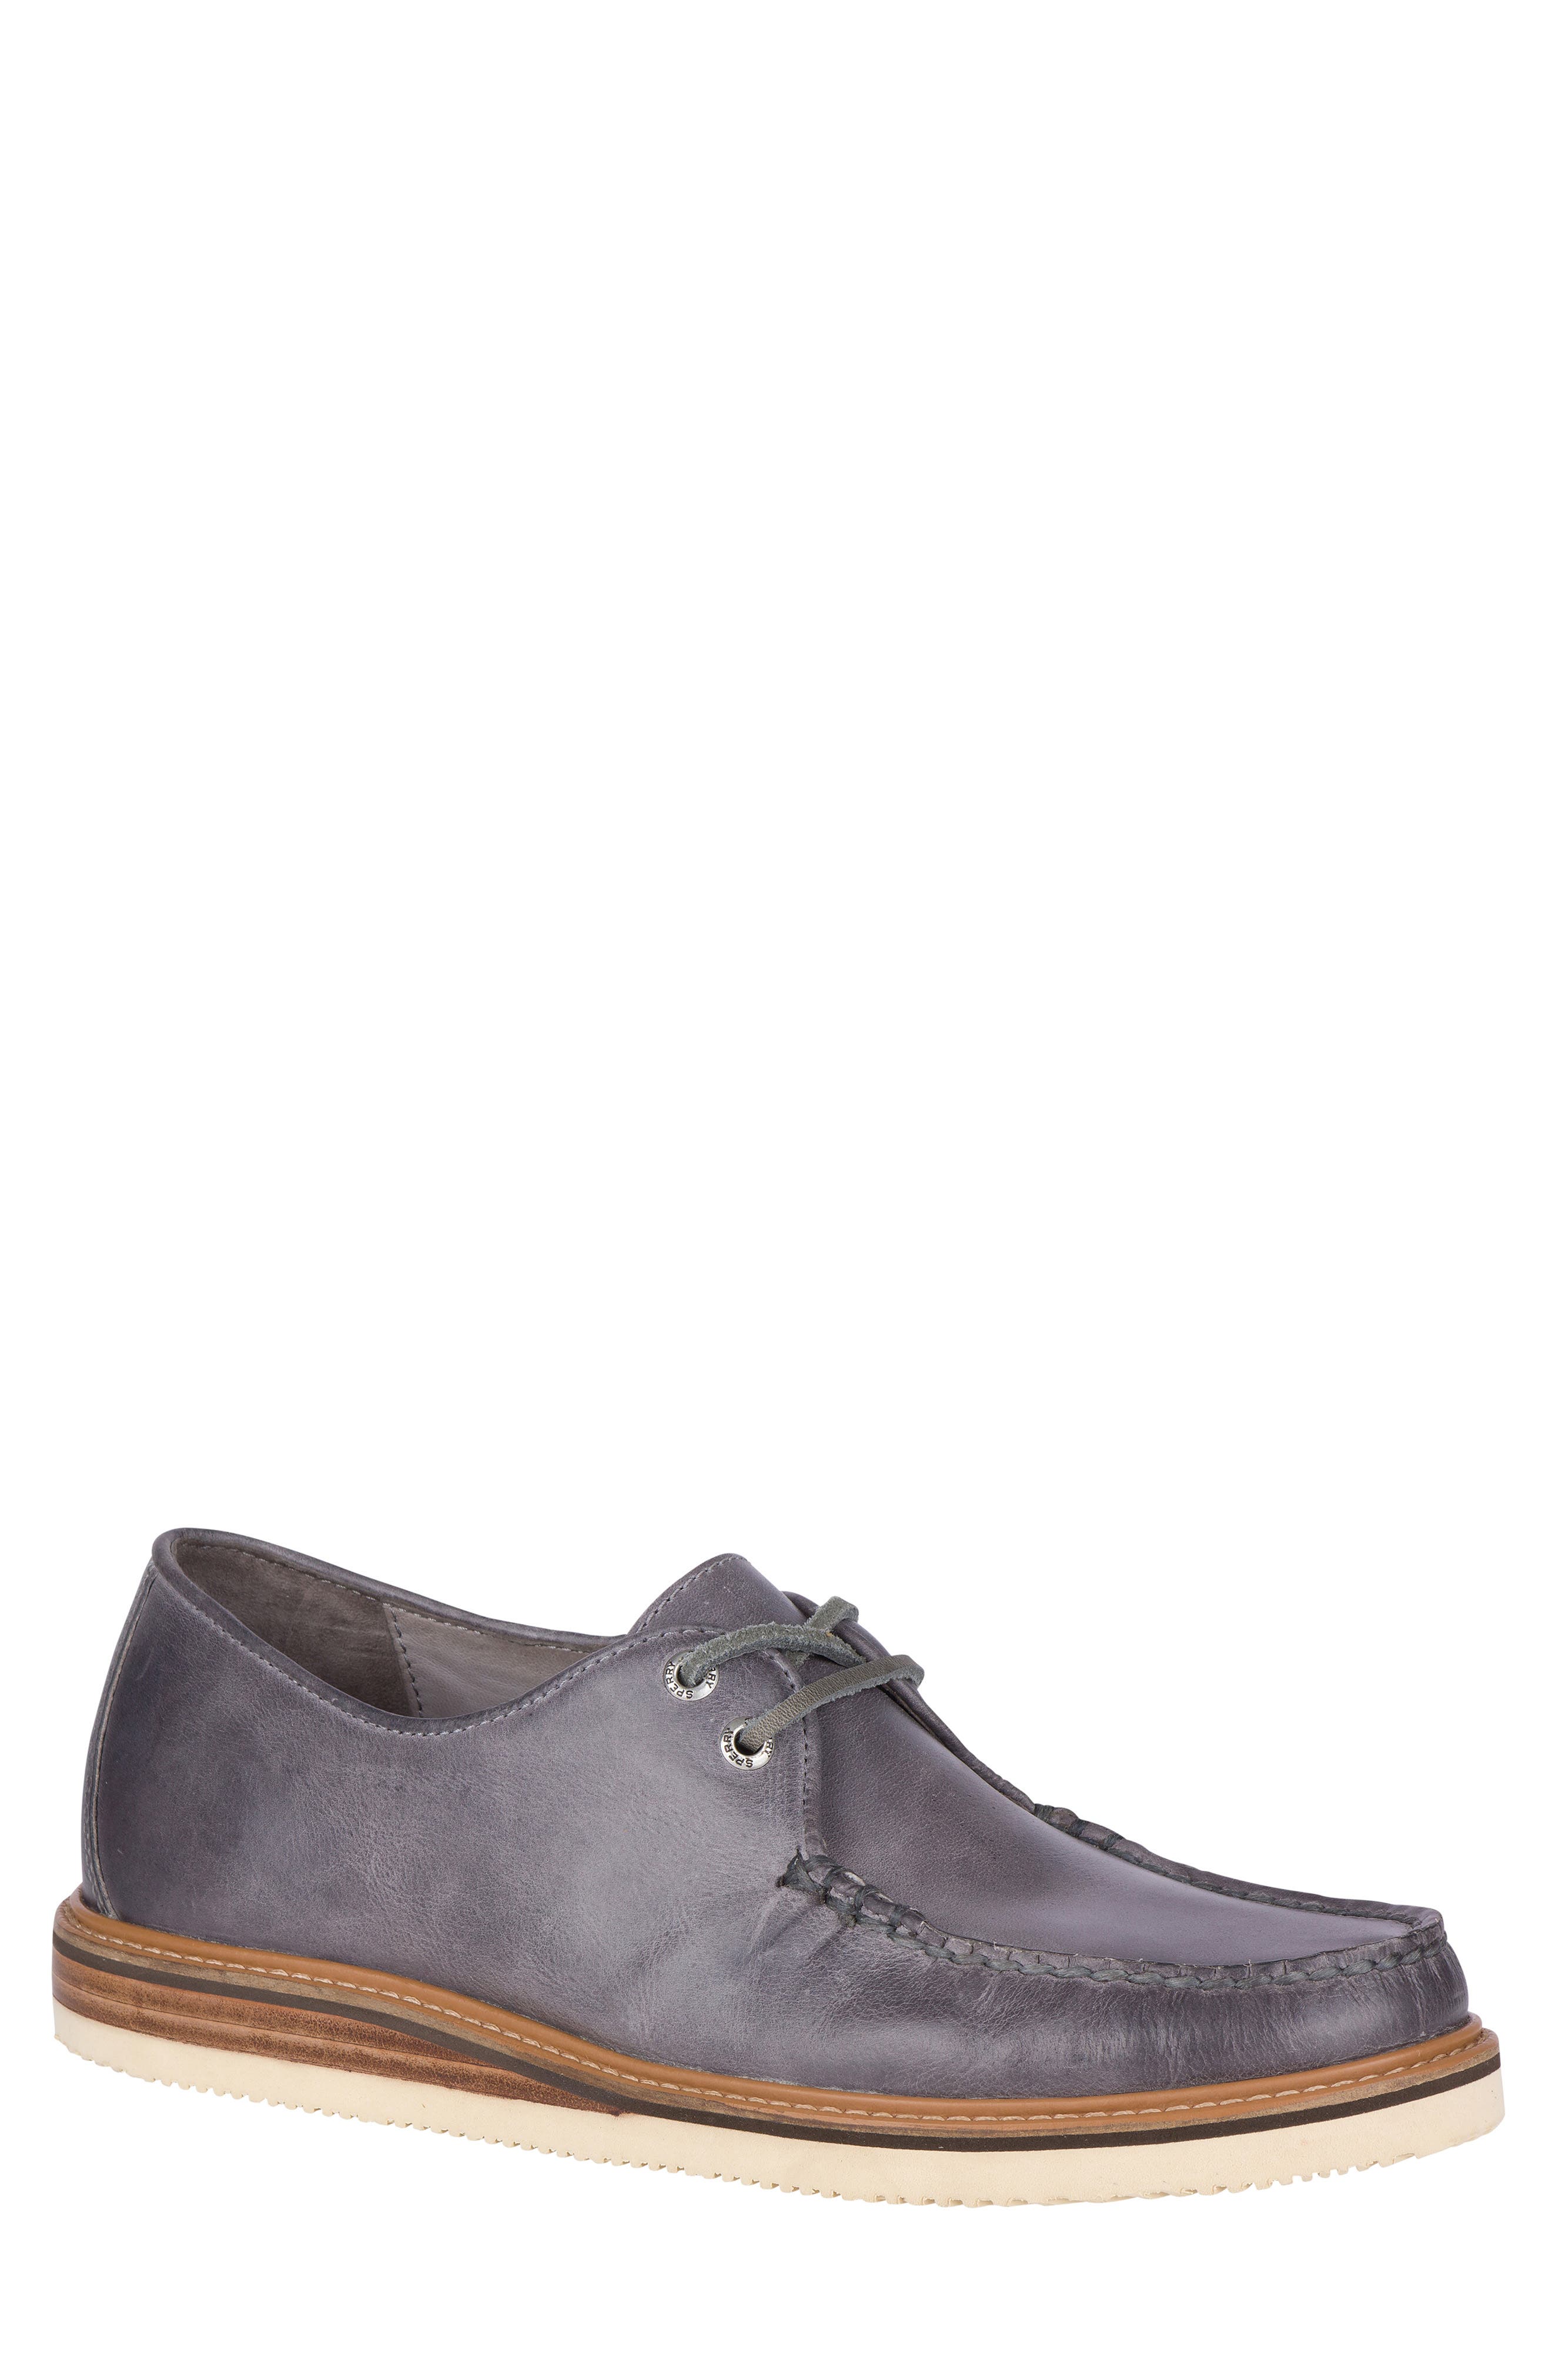 sperry cheshire oxford